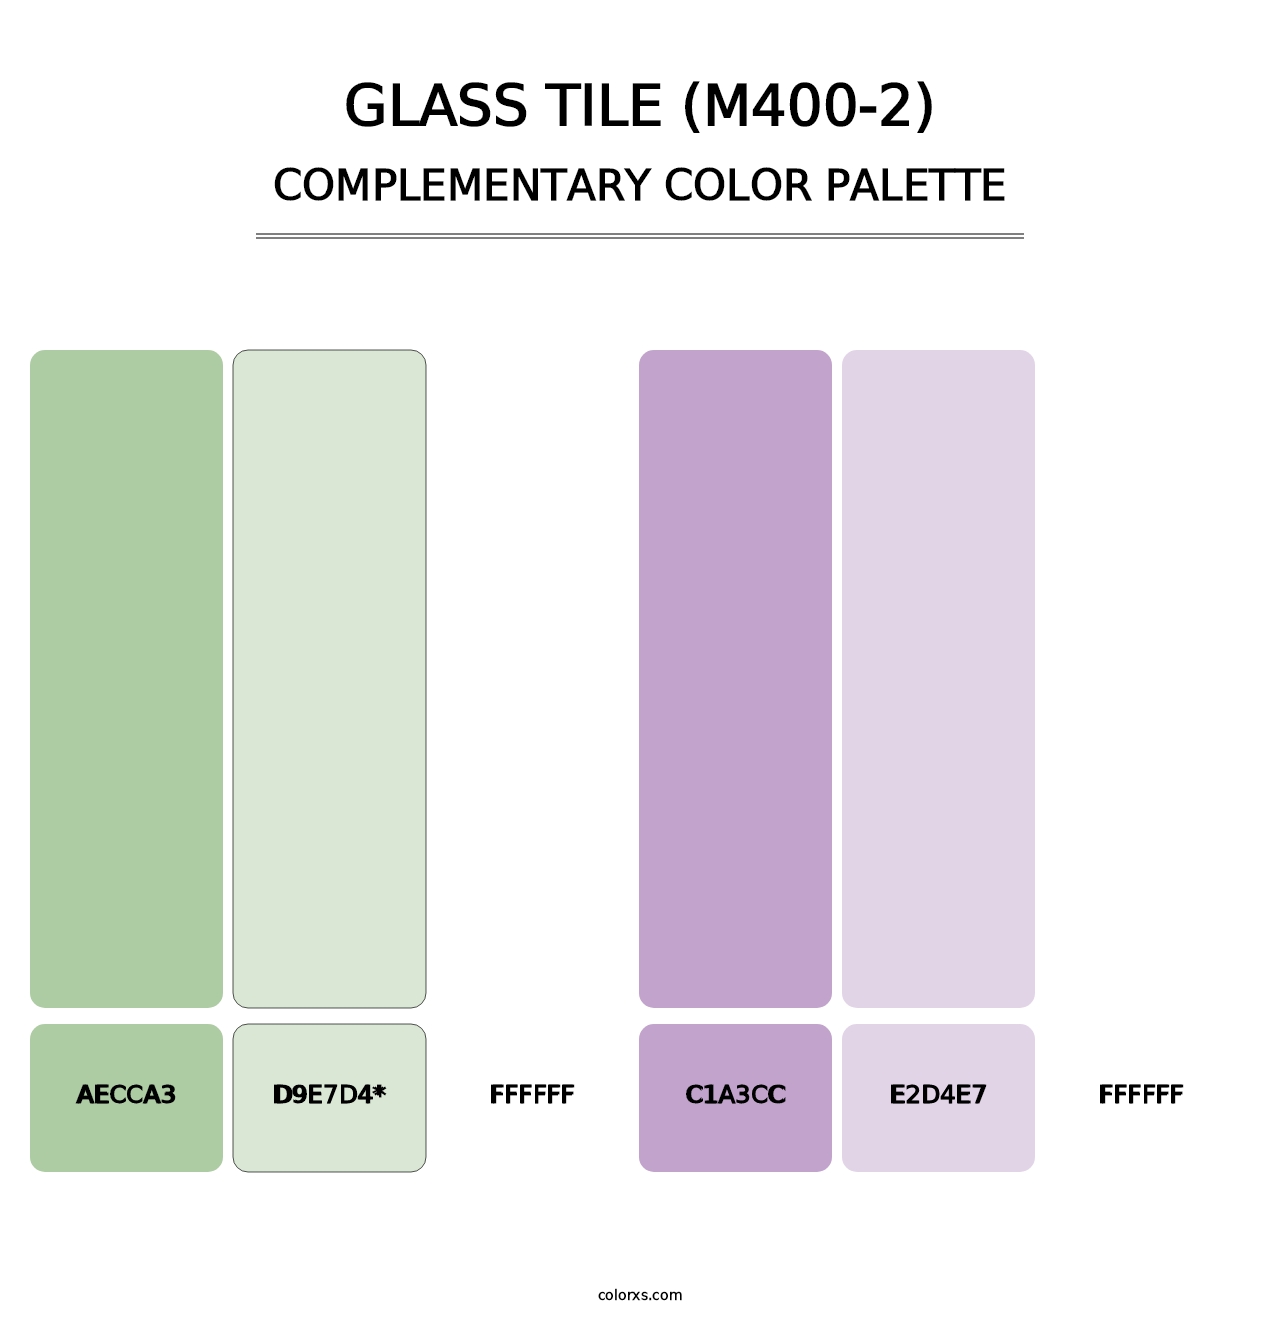 Glass Tile (M400-2) - Complementary Color Palette